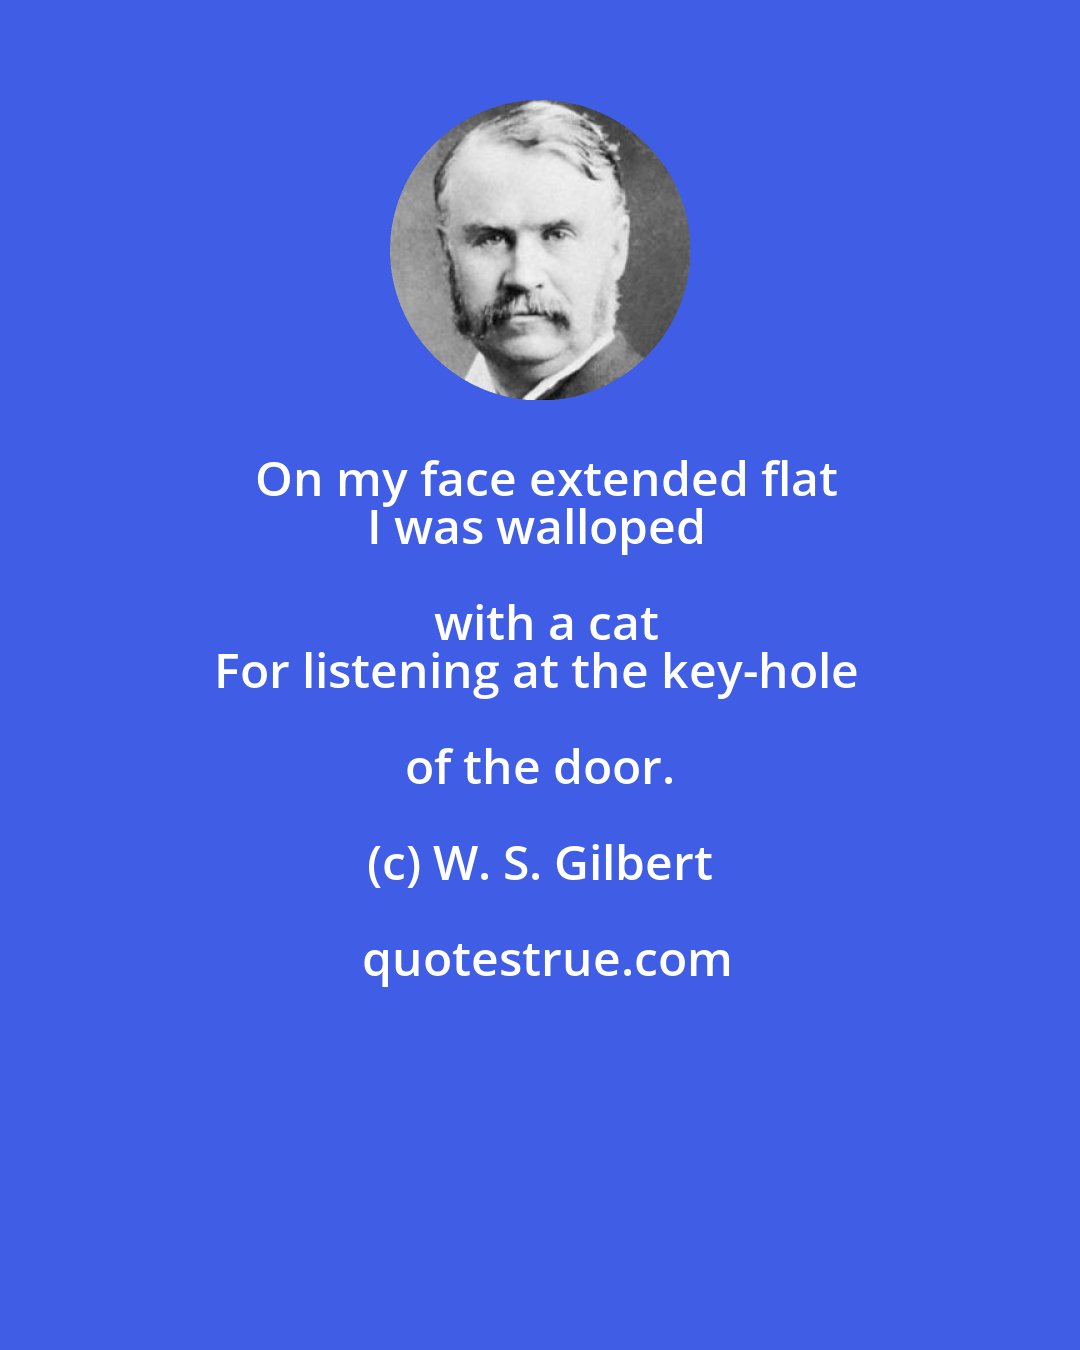 W. S. Gilbert: On my face extended flat
I was walloped with a cat
For listening at the key-hole of the door.